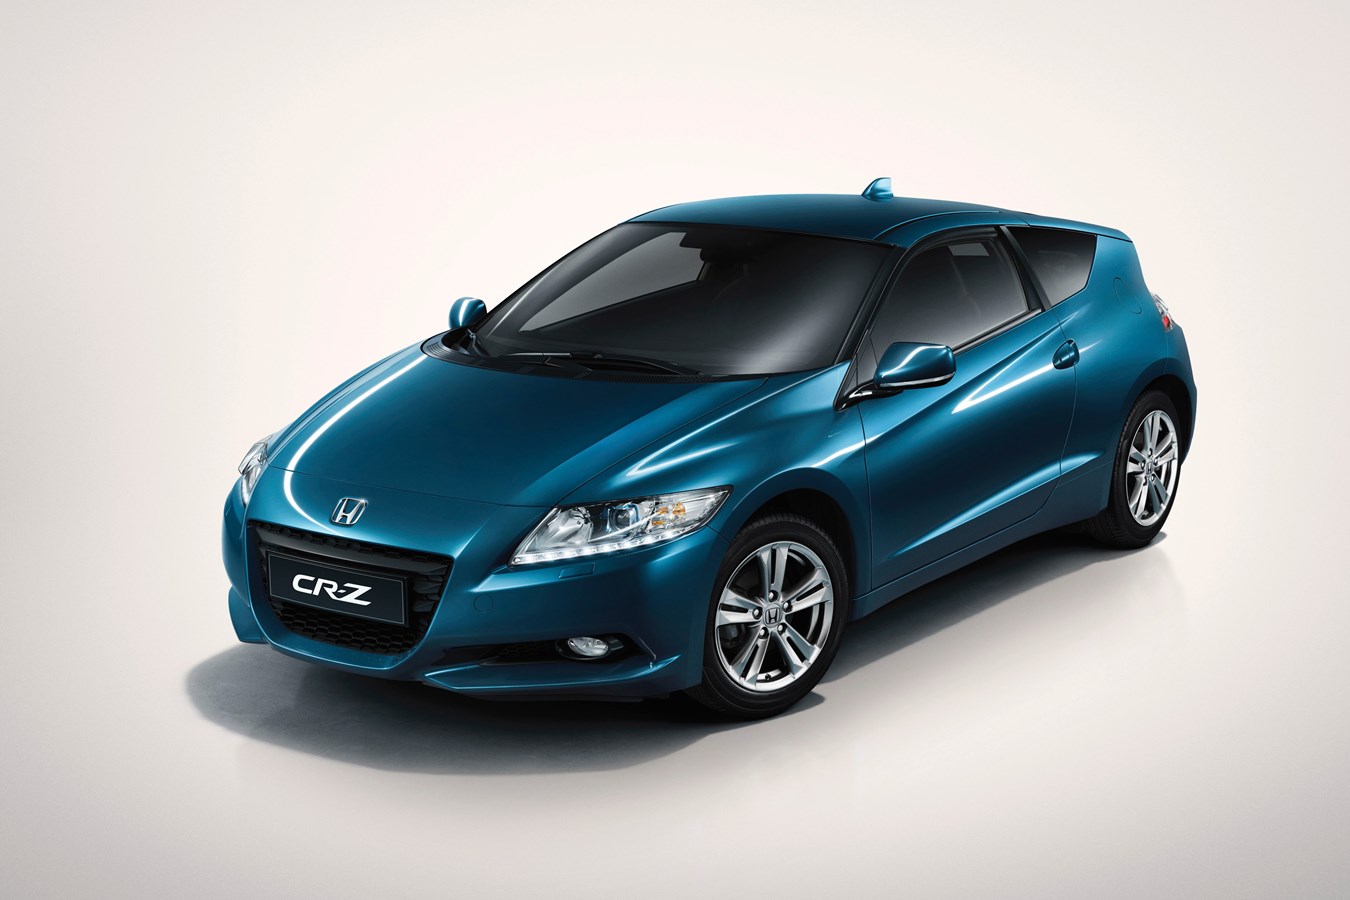 Pick of the Day: 2011 Honda CR-Z, it was customized on